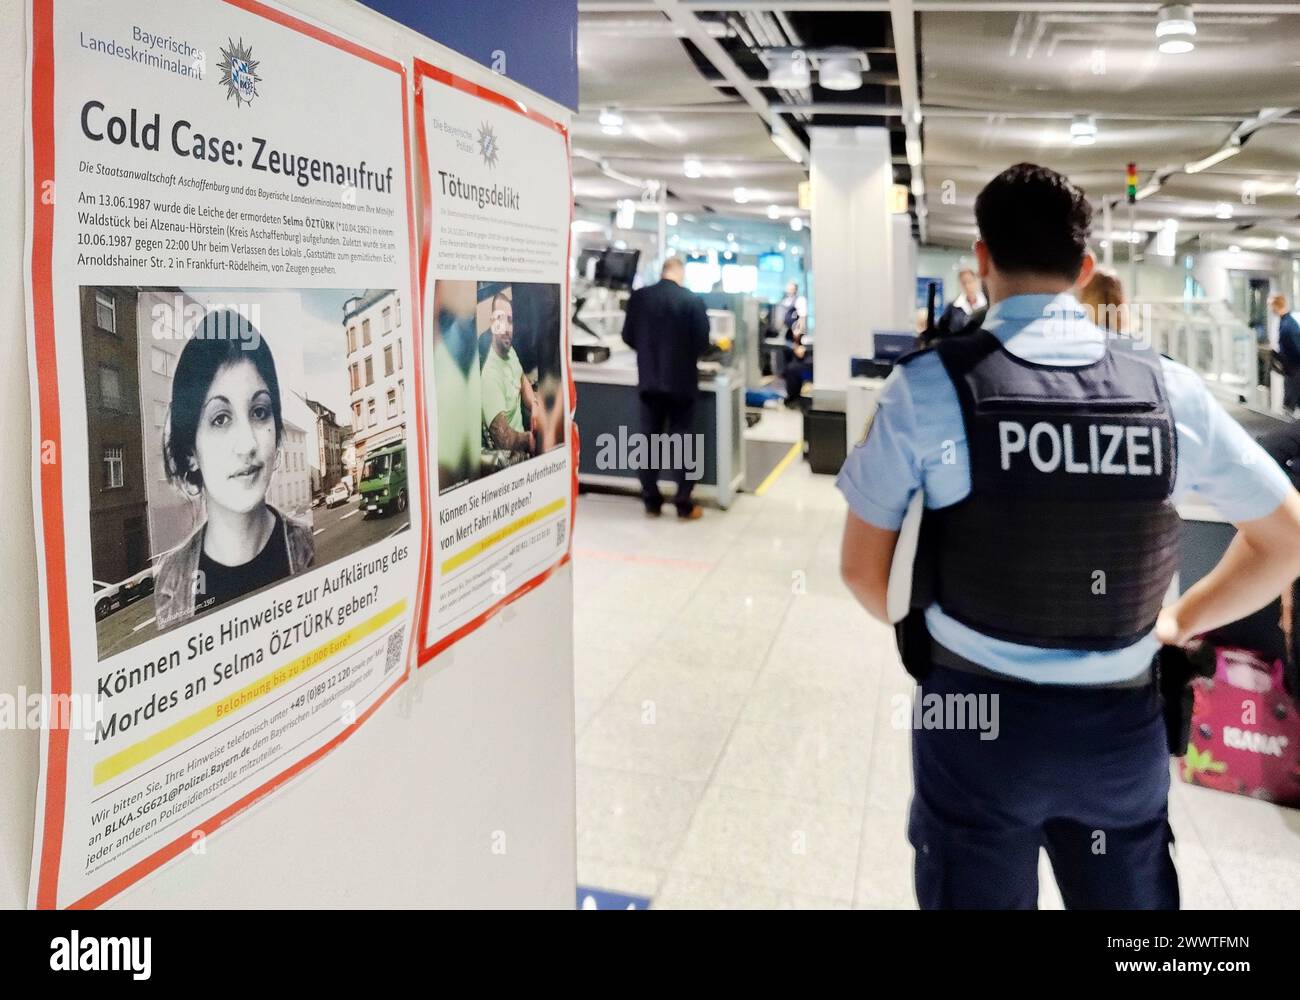 Wanted posters and police officer at Duesseldorf airport, Germany, North Rhine-Westphalia, Lower Rhine, Dusseldorf Stock Photo